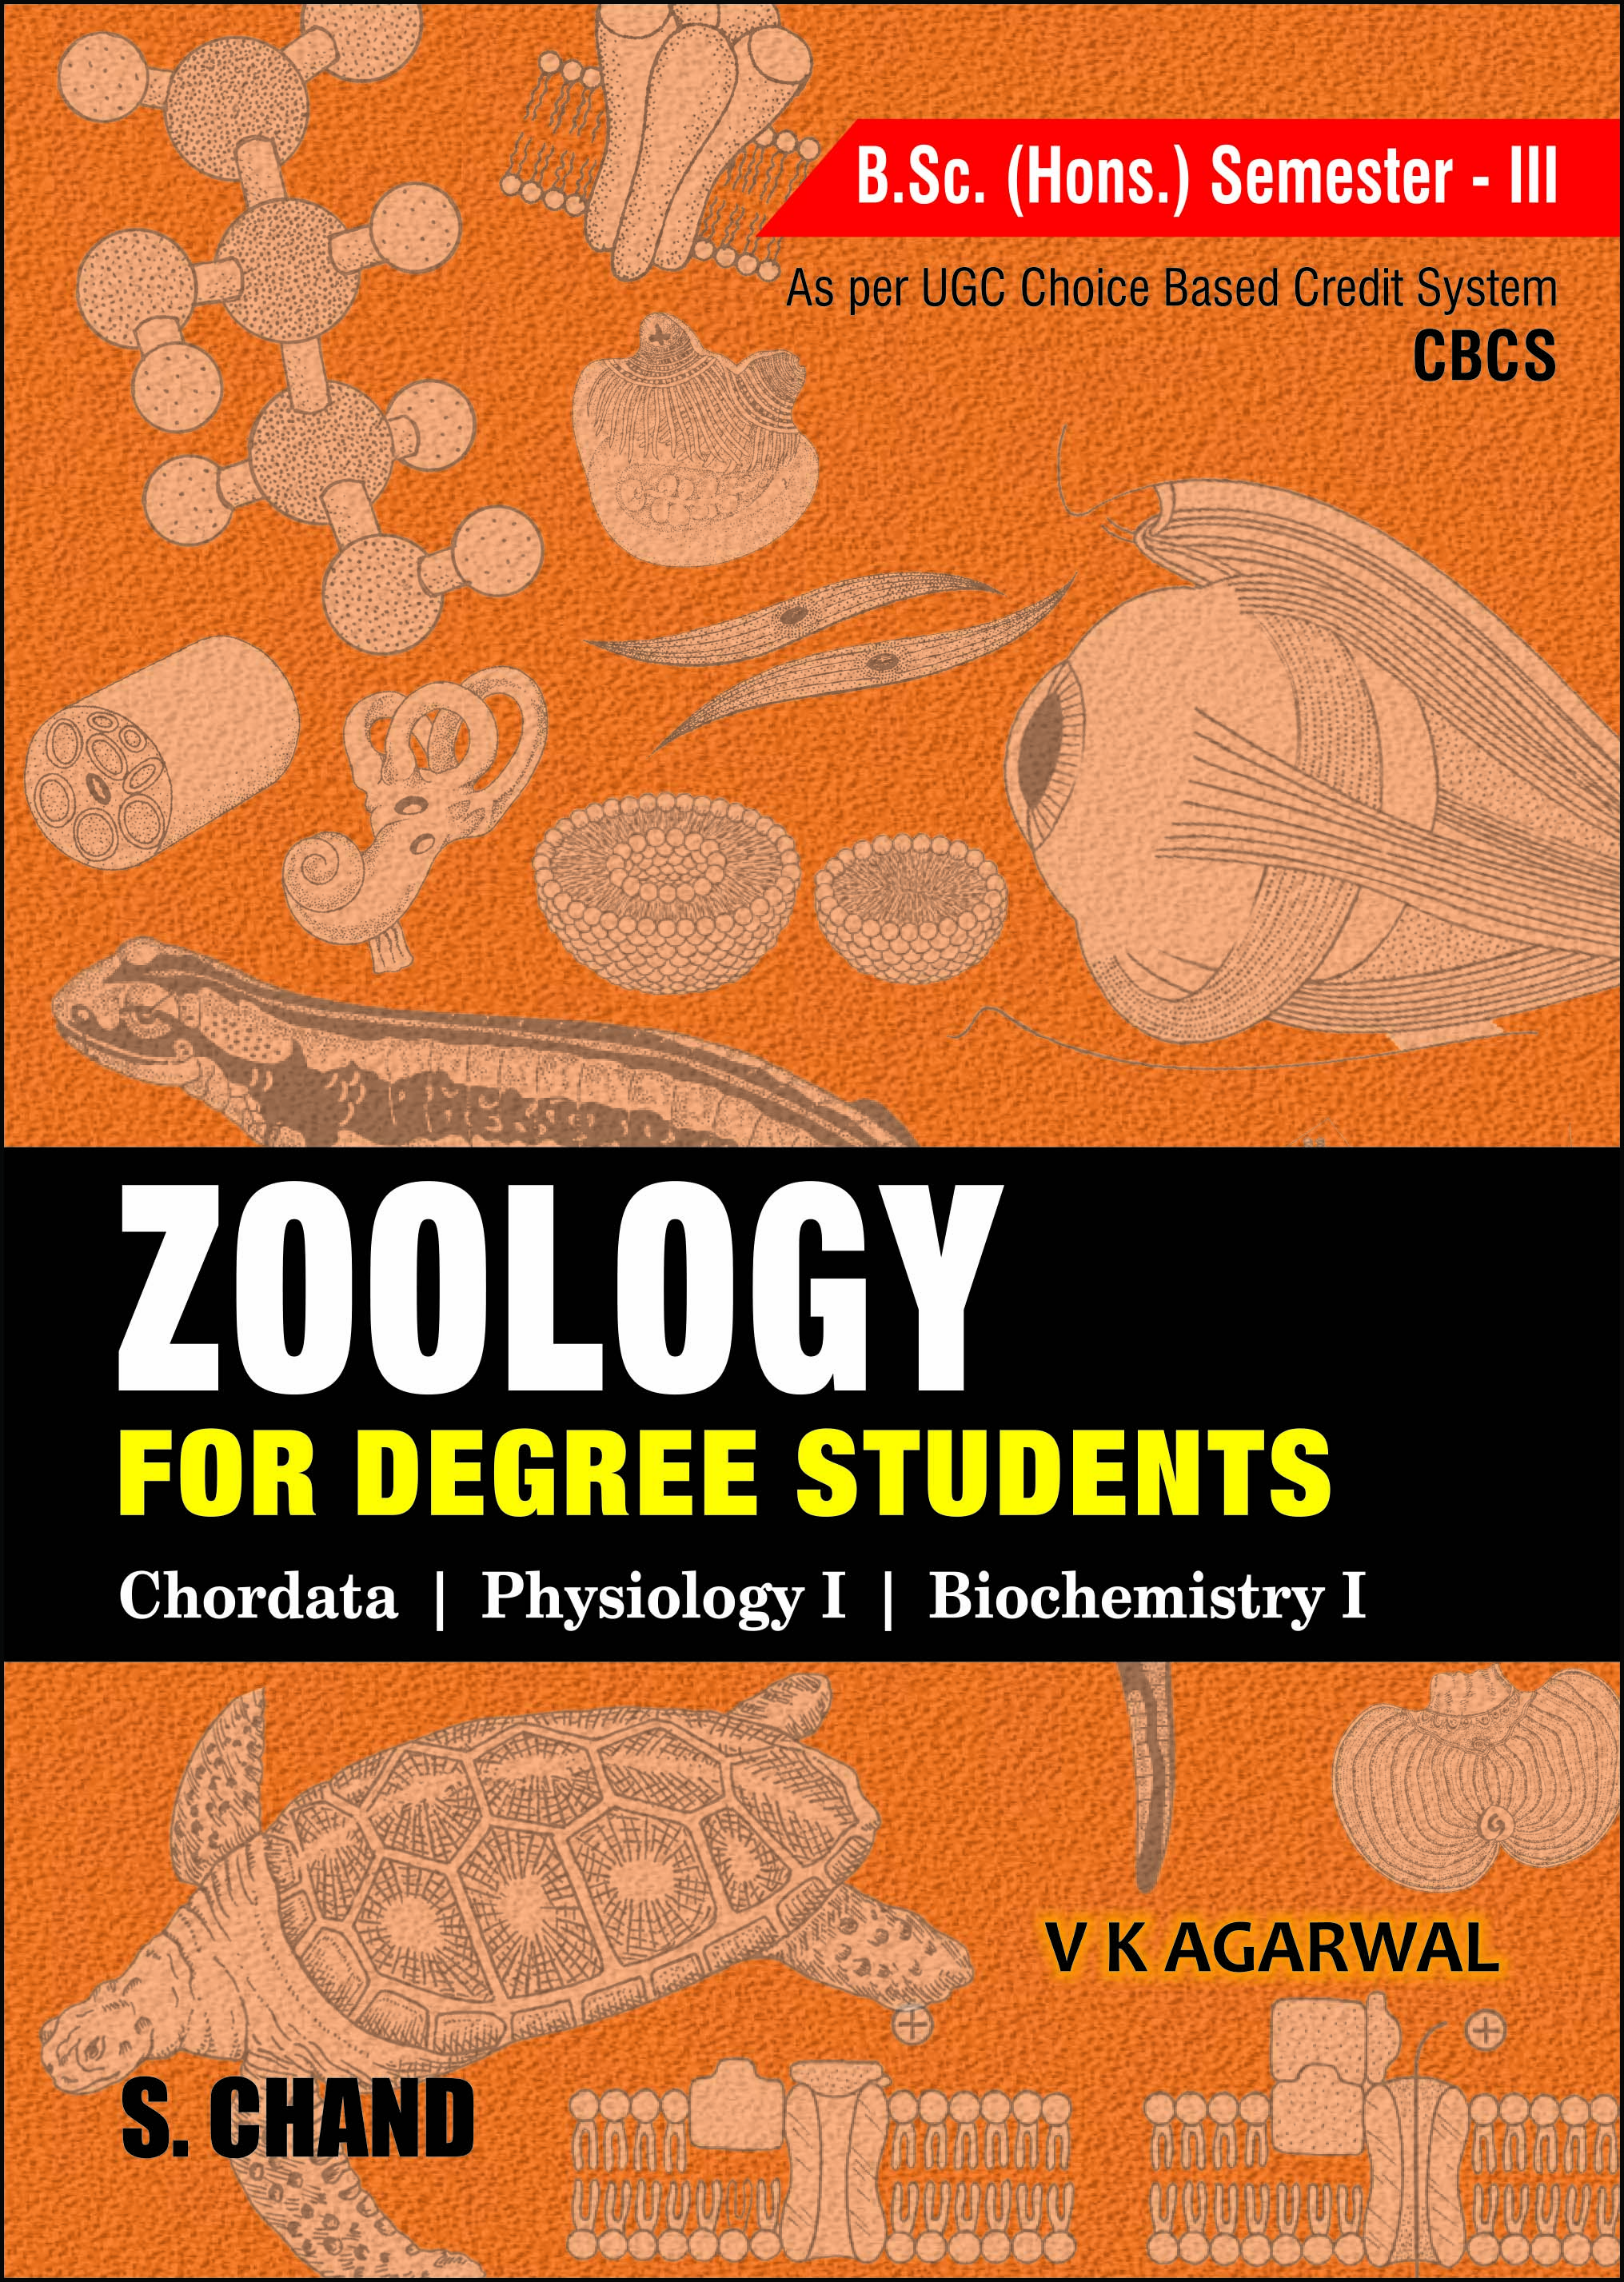 Zoology for Degree Students [B.Sc. (Hons.) Sem.-III, As per CBCS]